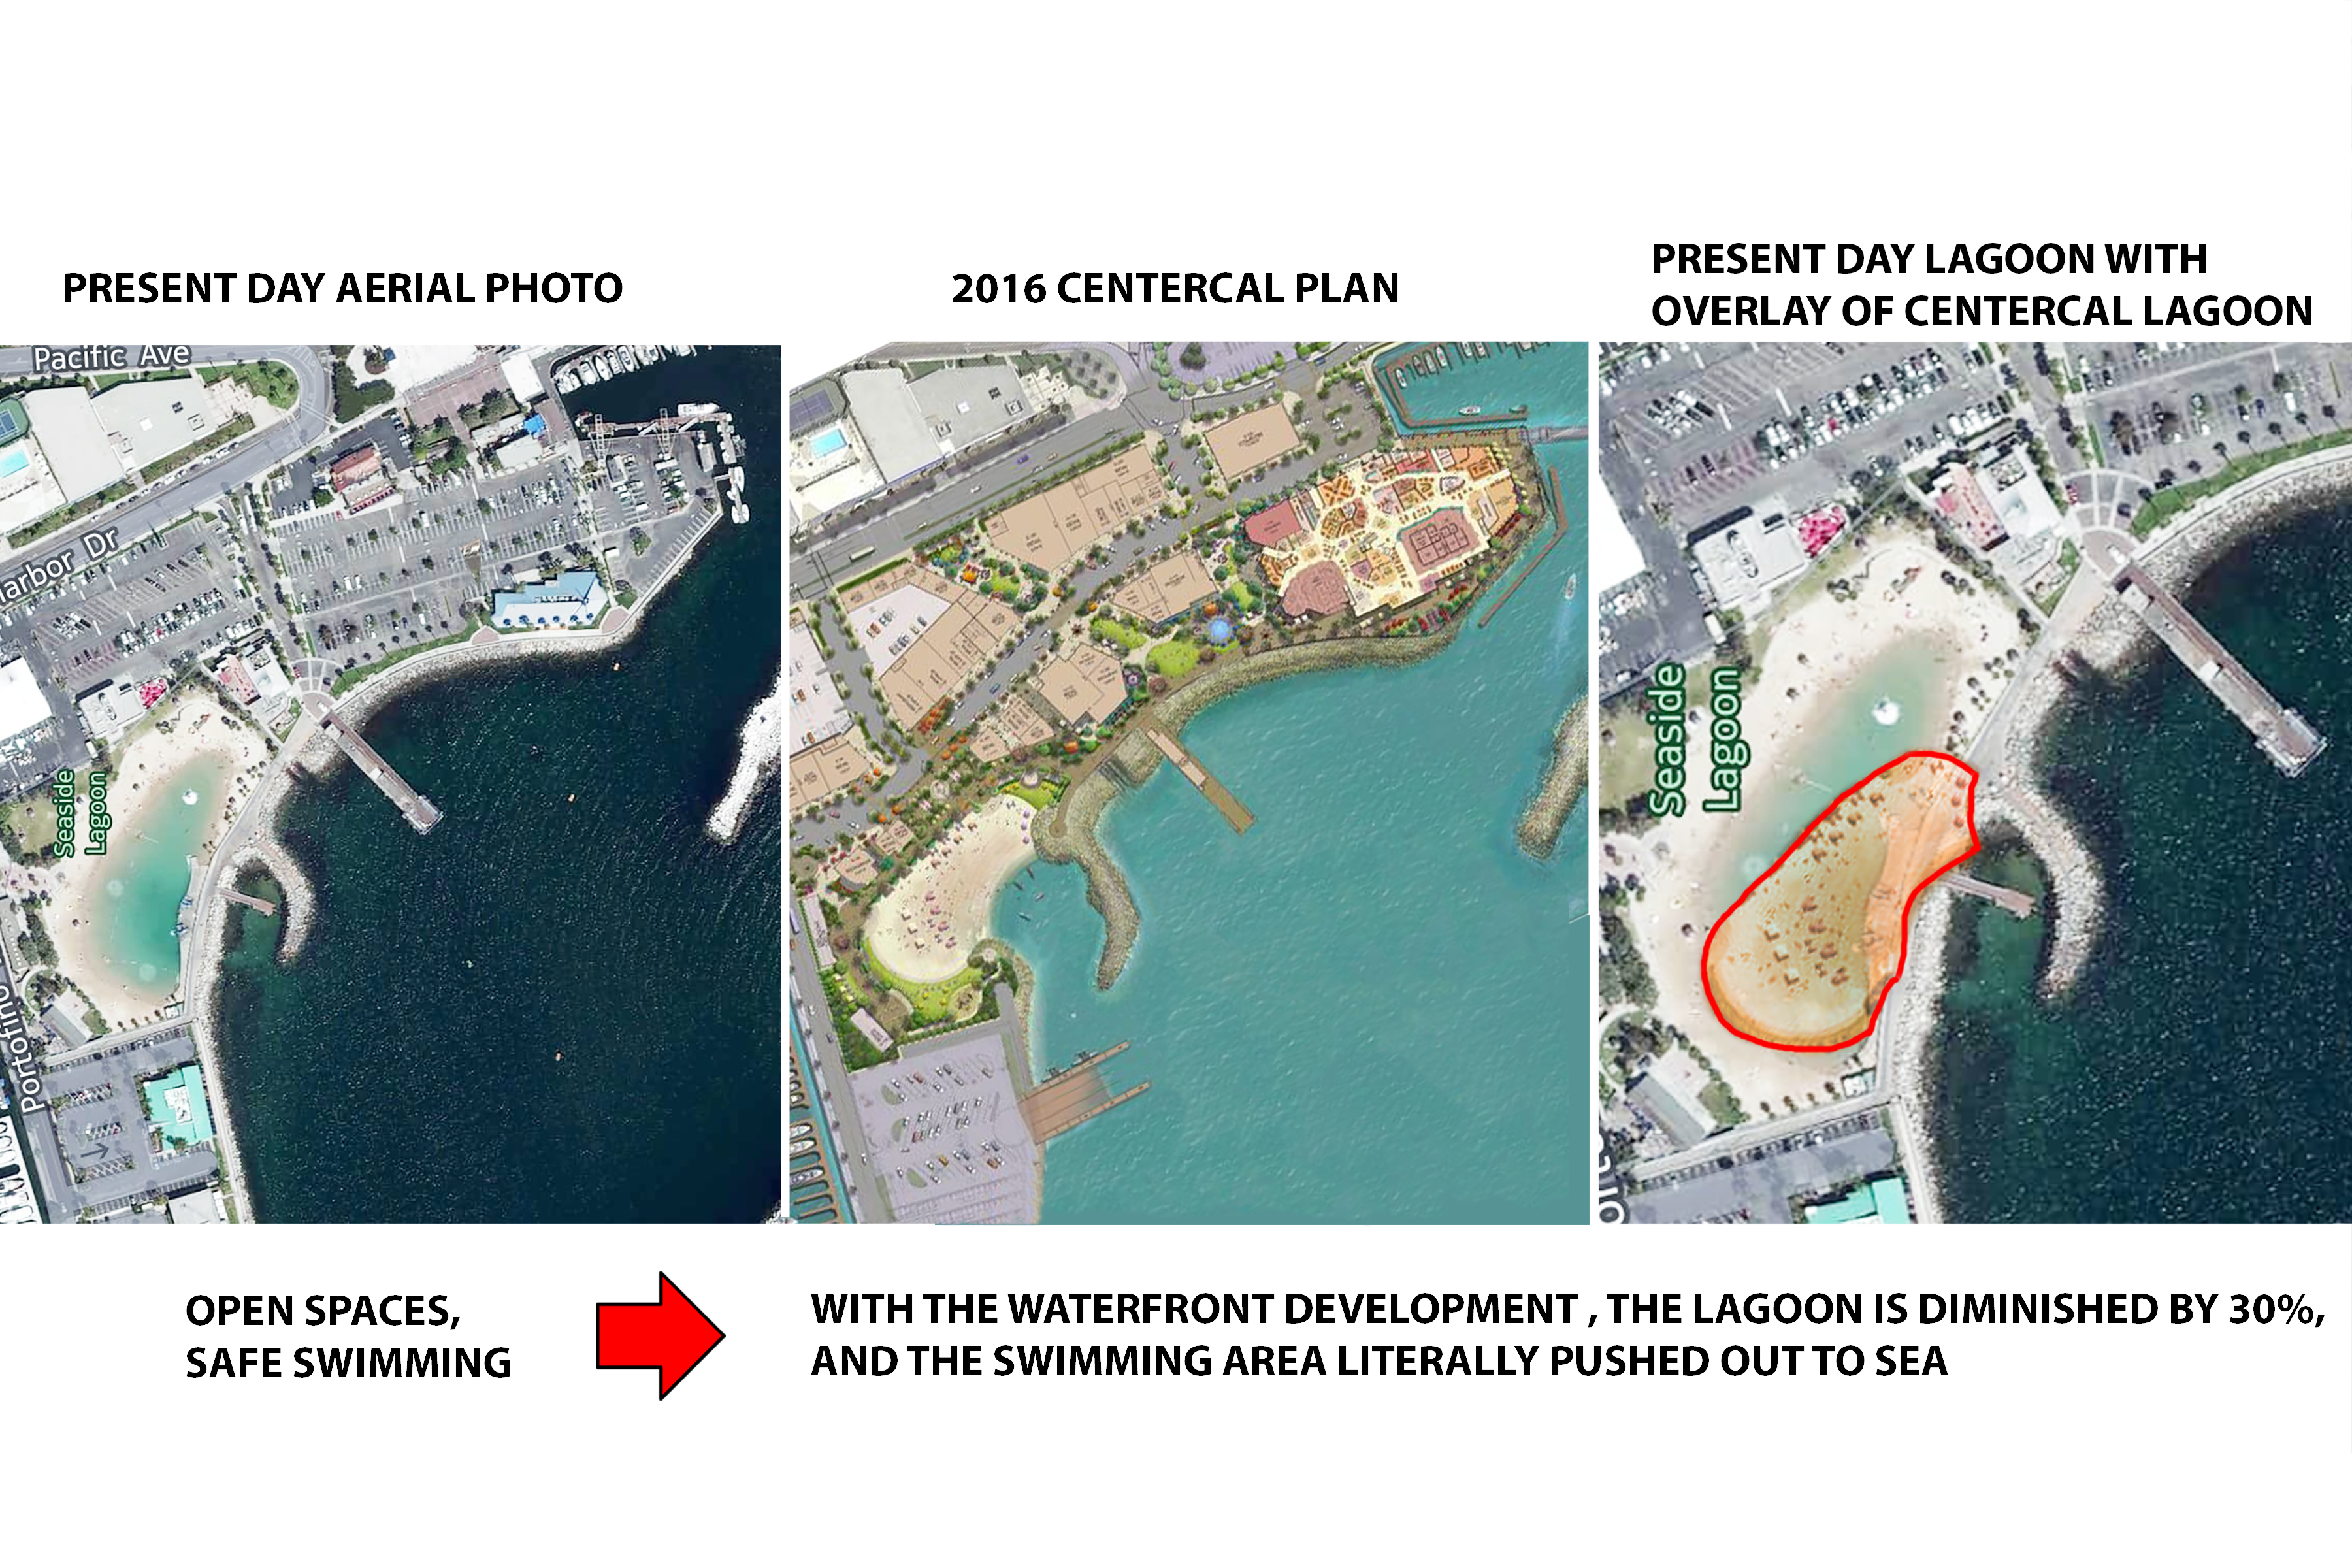 Seaside lagoon Redondo Beach King harbor waterfront proposed project massive #rbwaterfront #myrbwaterfront